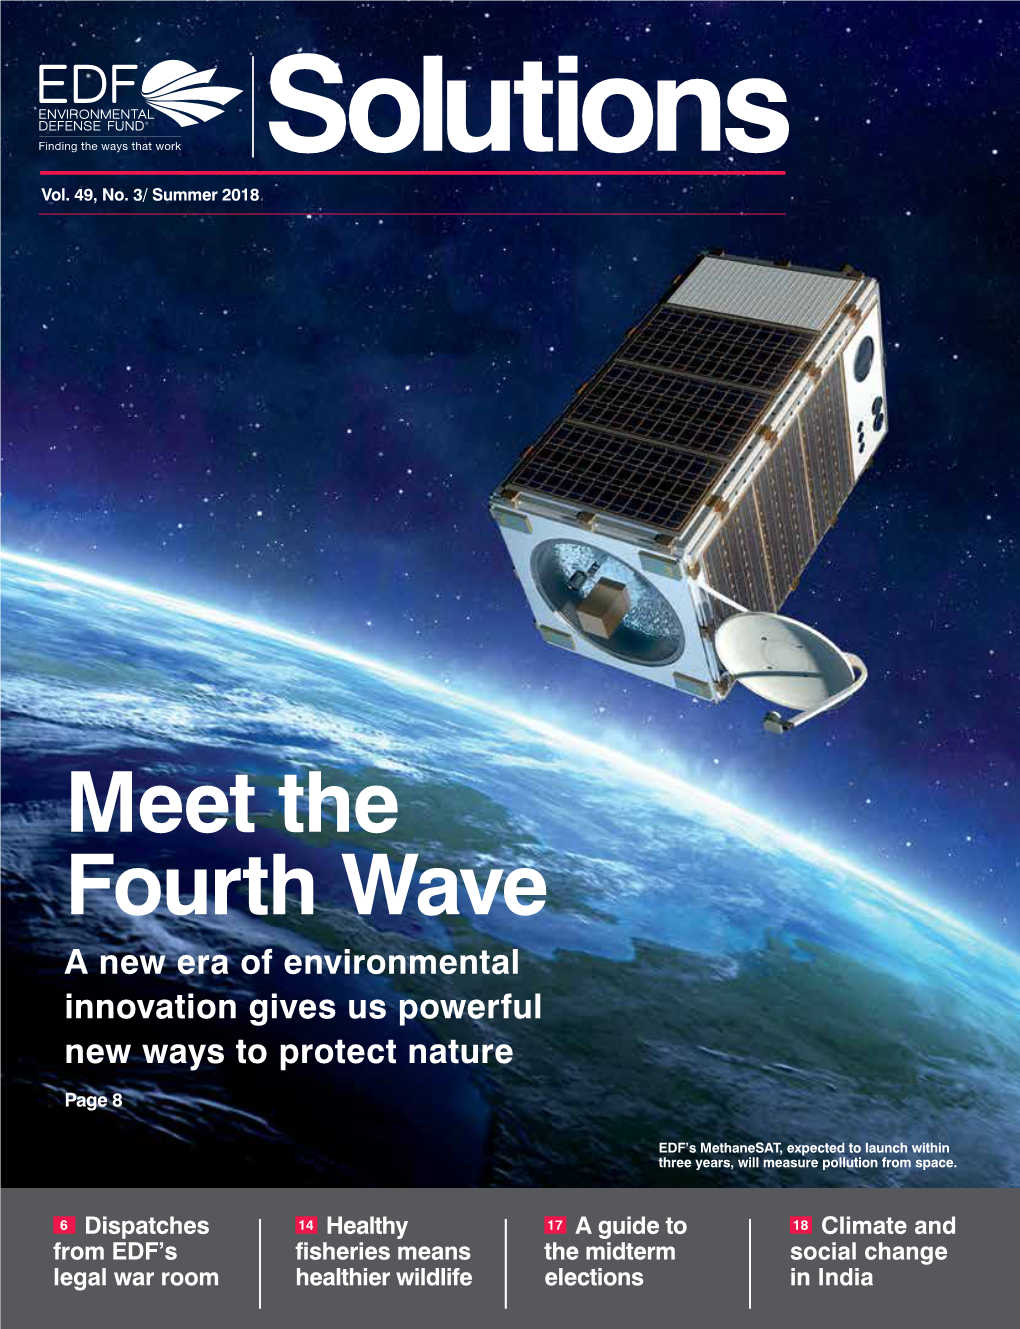 Meet the Fourth Wave a New Era of Environmental Innovation Gives Us Powerful New Ways to Protect Nature